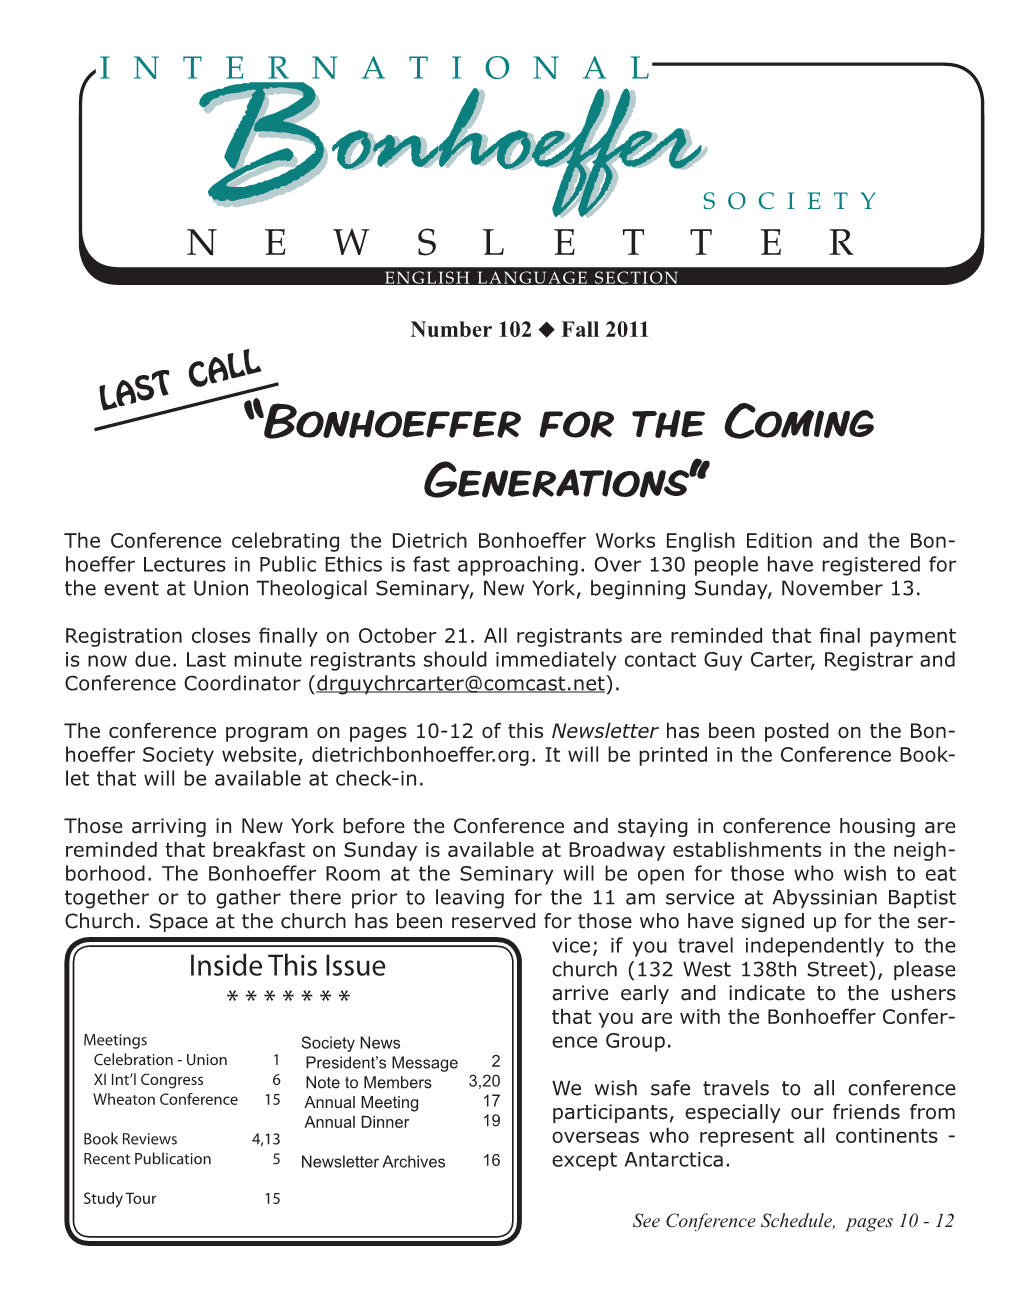 “Bonhoeffer for the Coming Generations” Conference Schedule